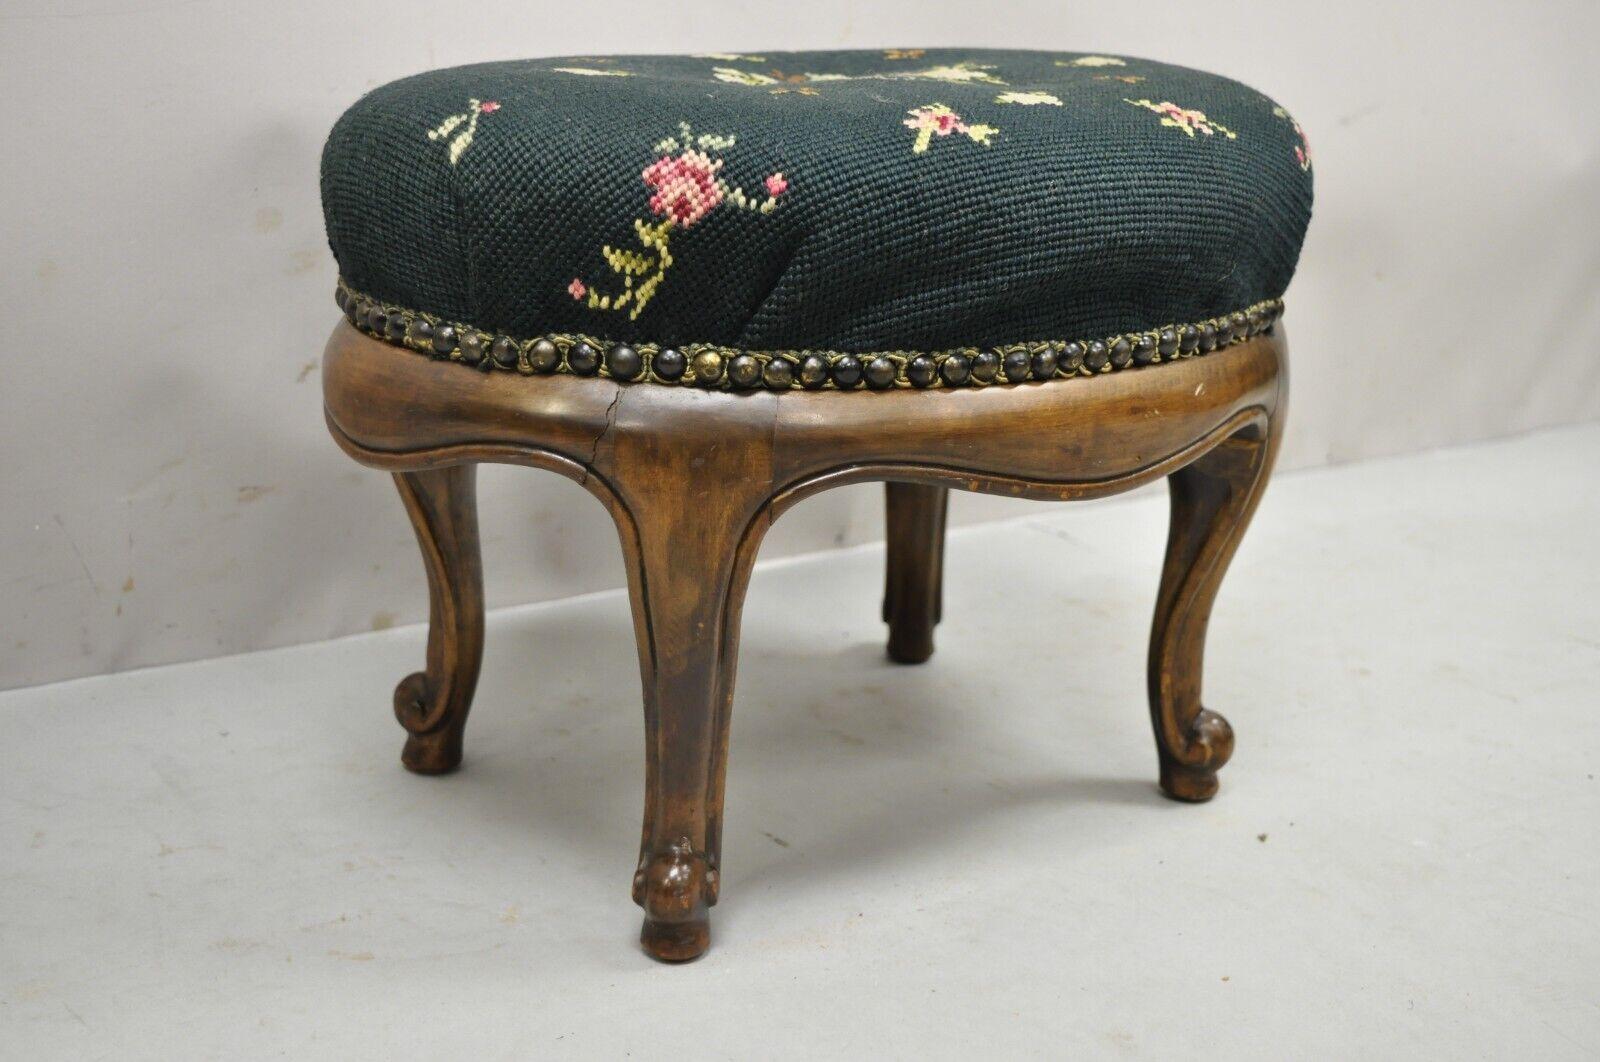 Antique French Victorian Green Floral Needlepoint Oval Mahogany Small Footstool 1